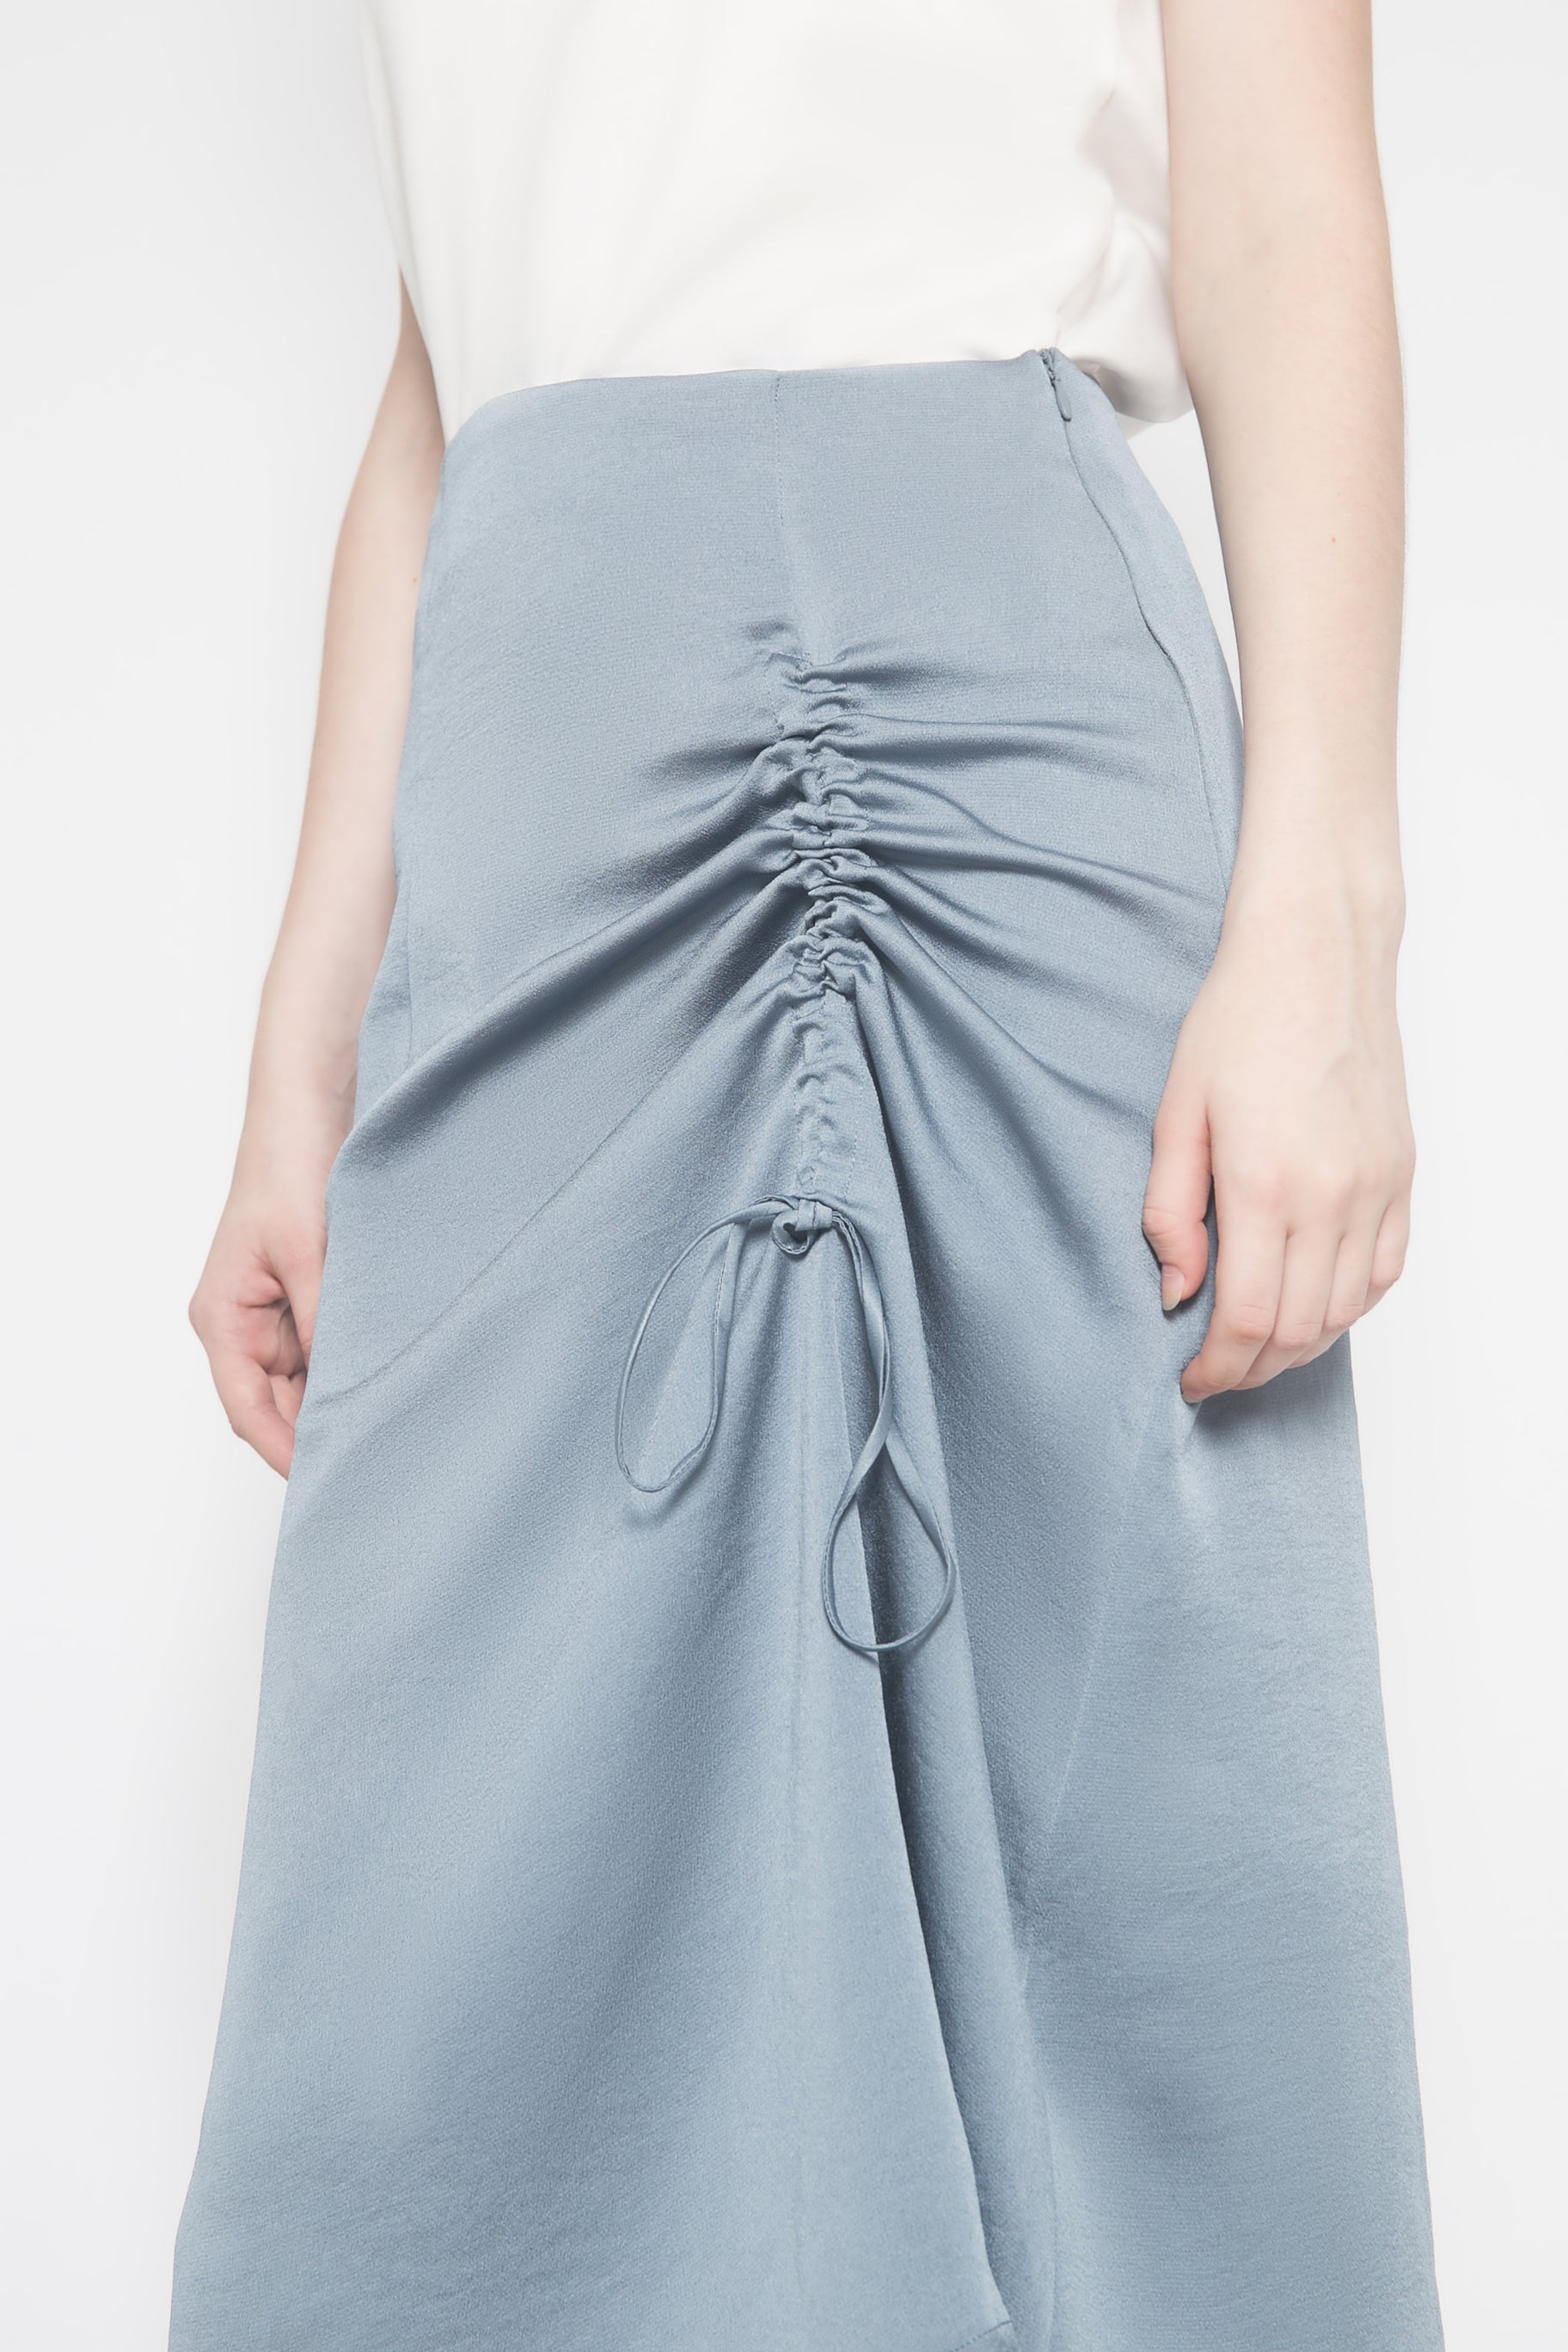 Up Front Skirt in Greyish Baby Blue